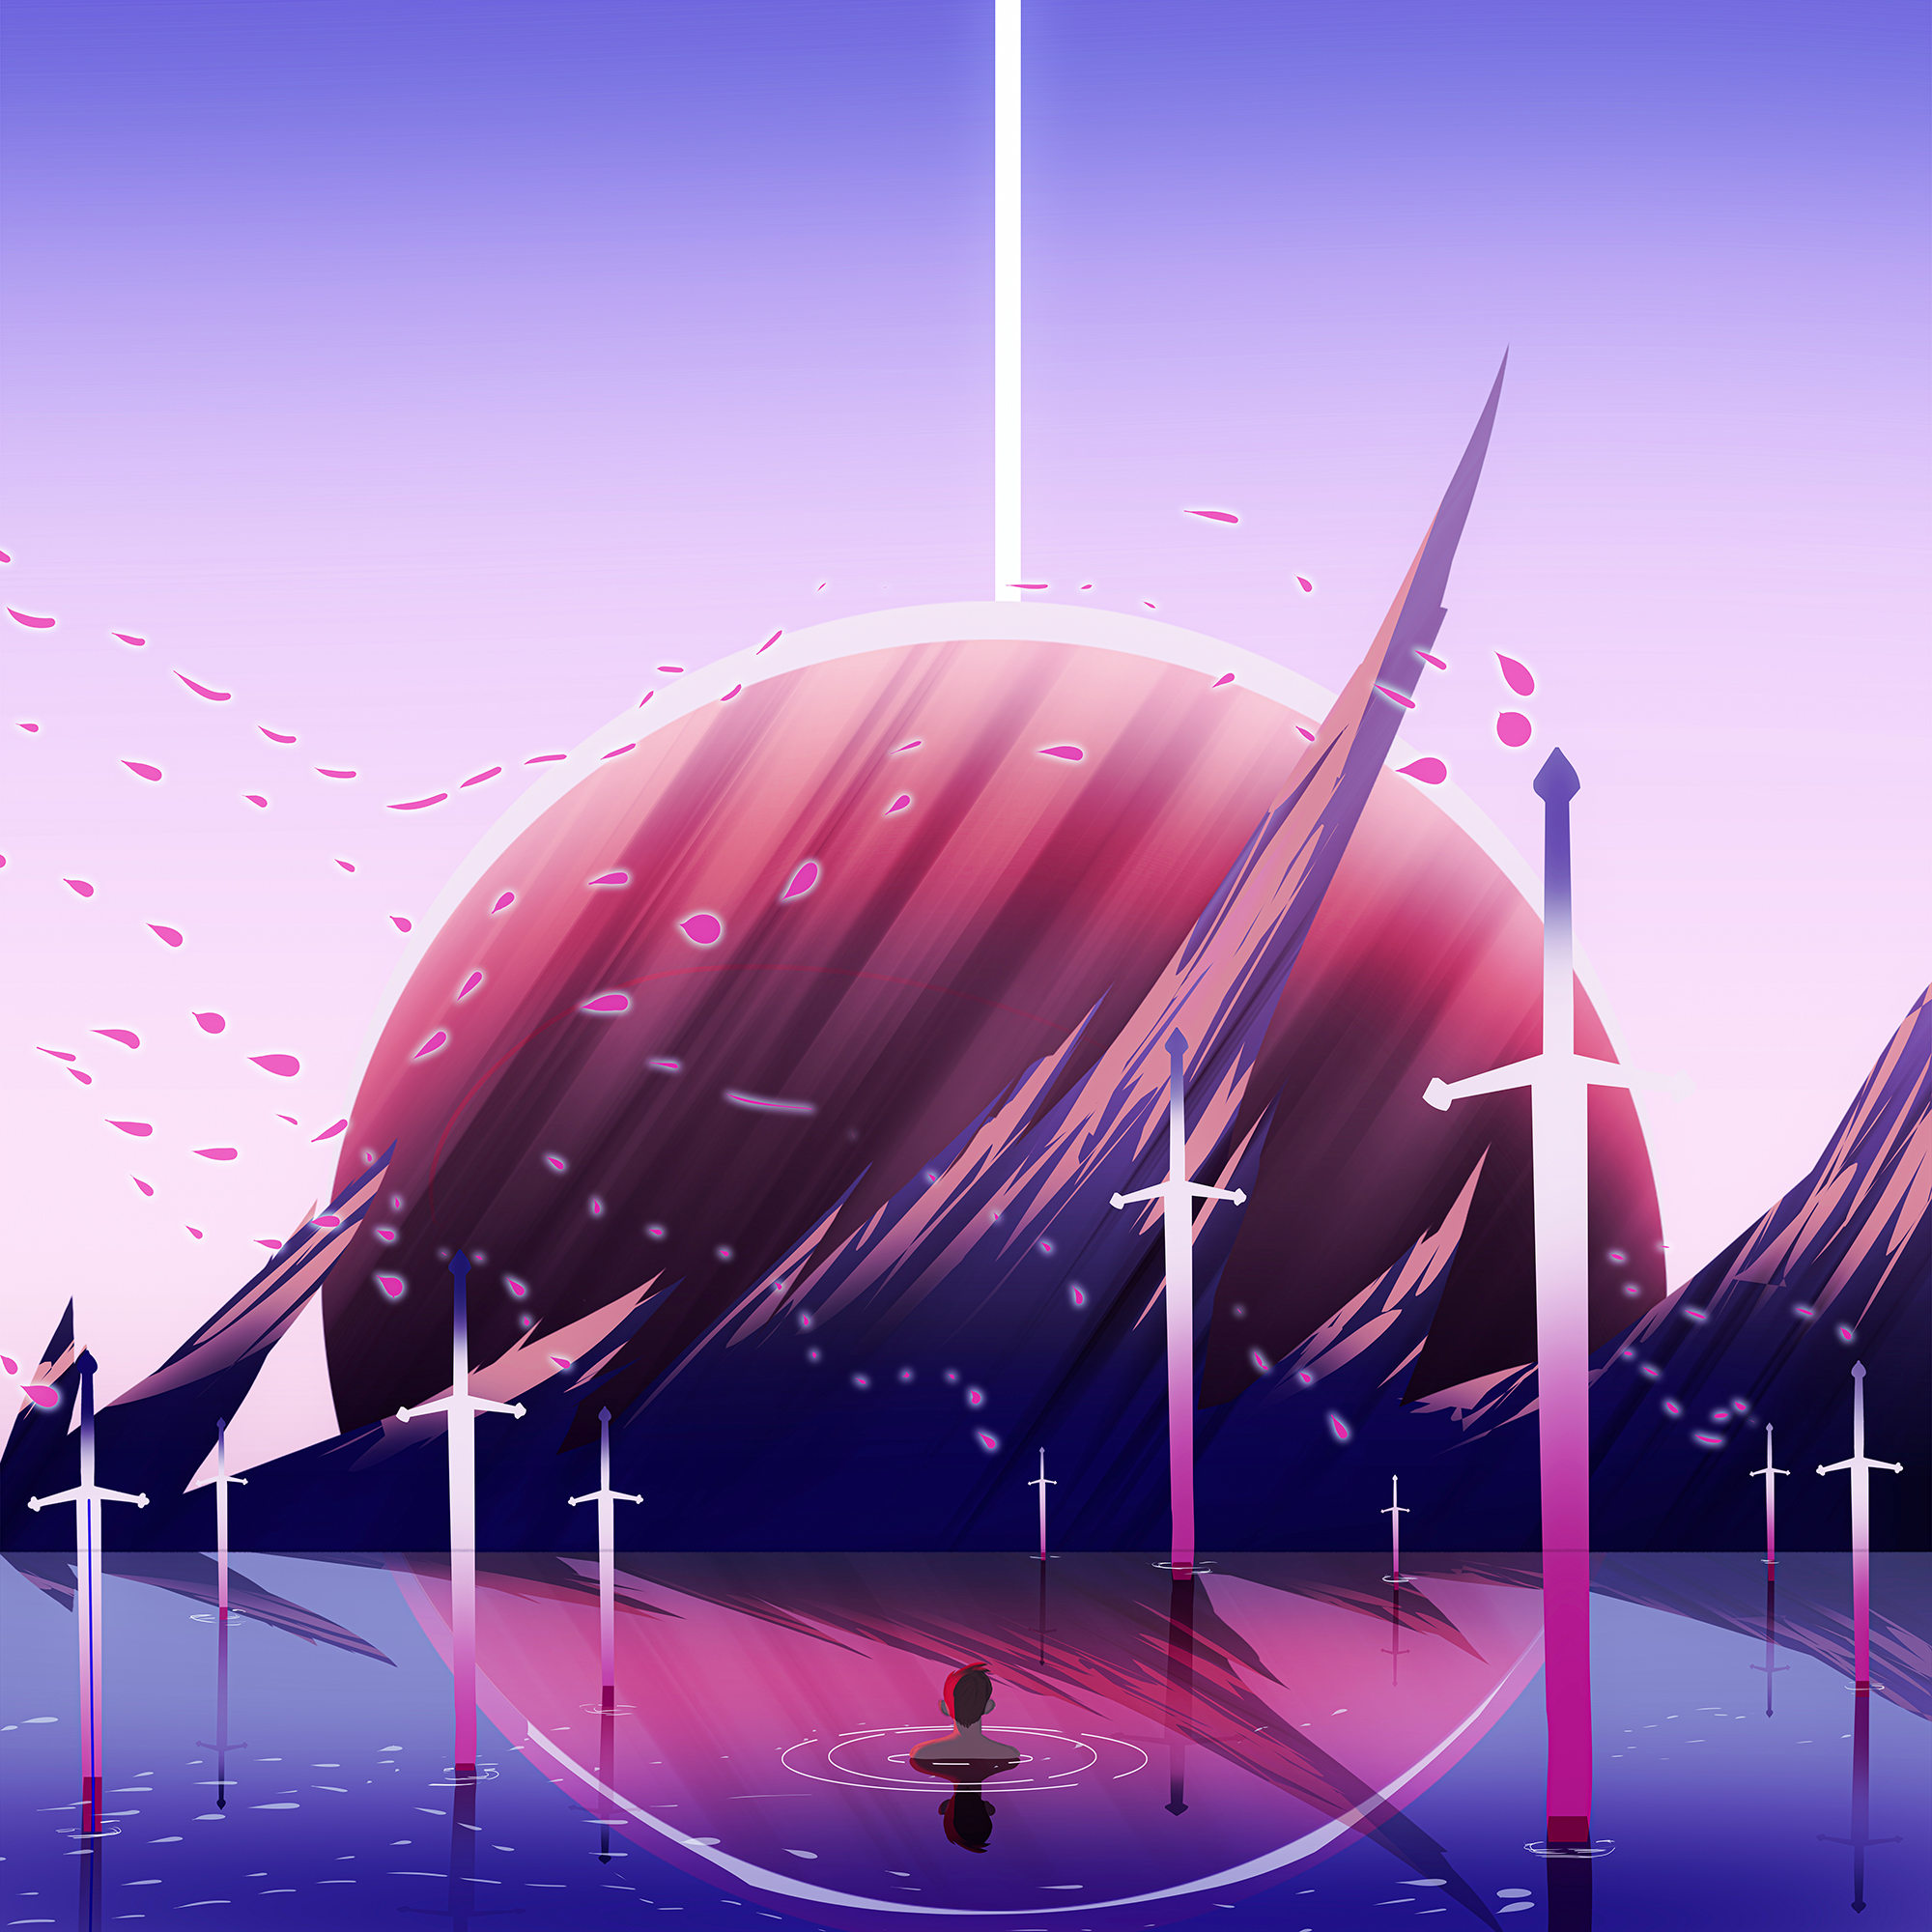 General 2000x2000 cherry blossom planet sword cliff sky space art surreal